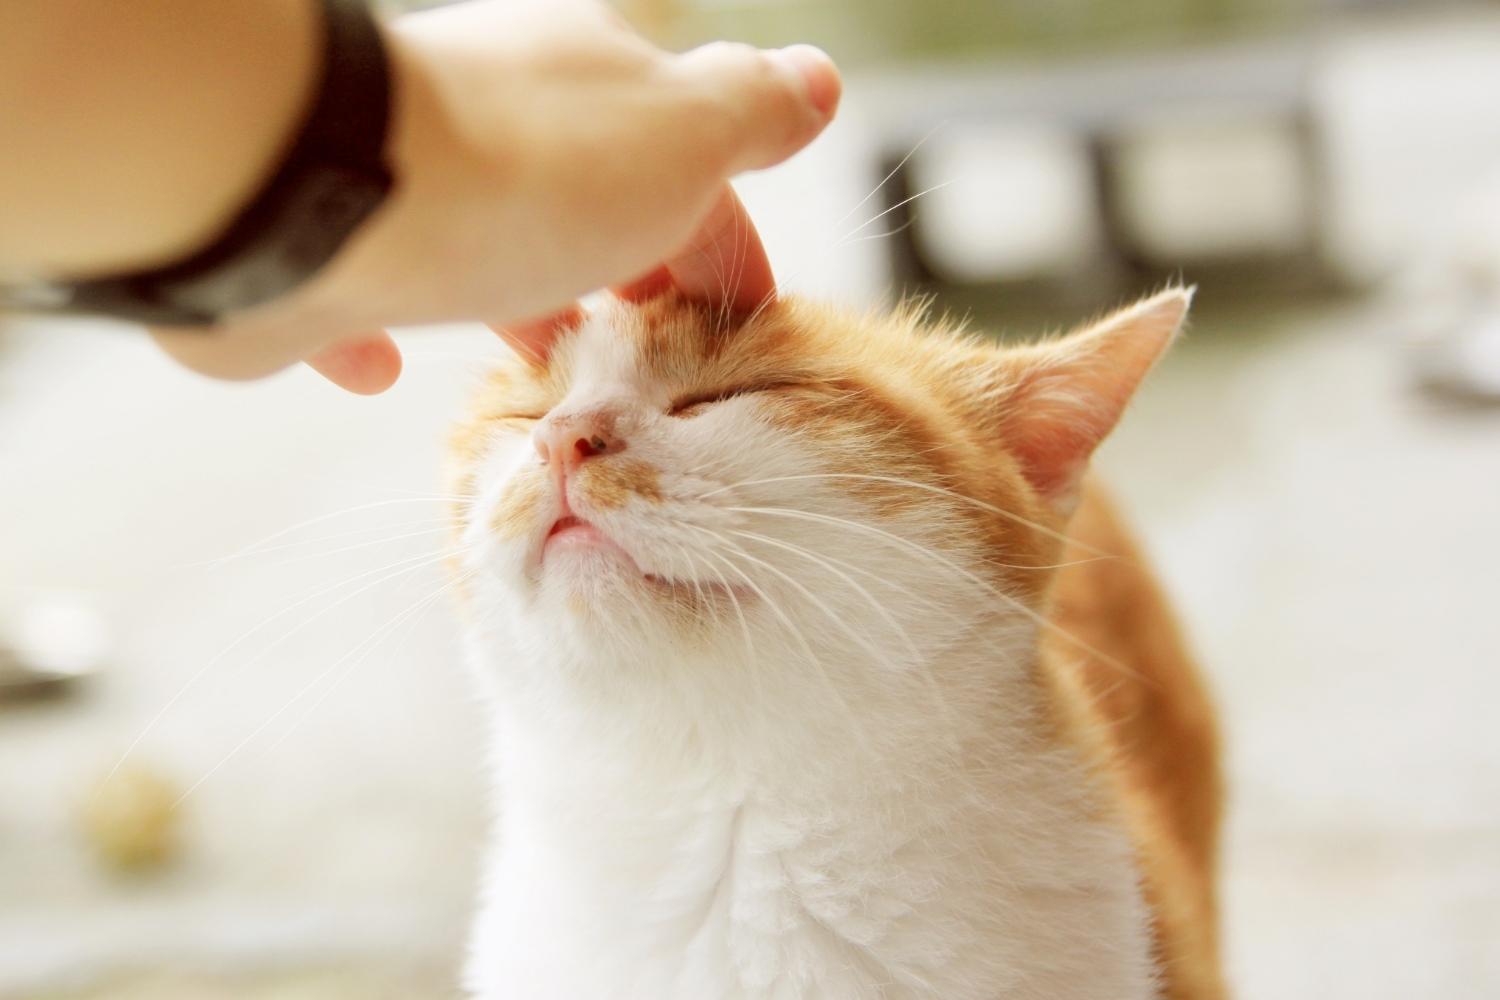 Ginger cat being stroked